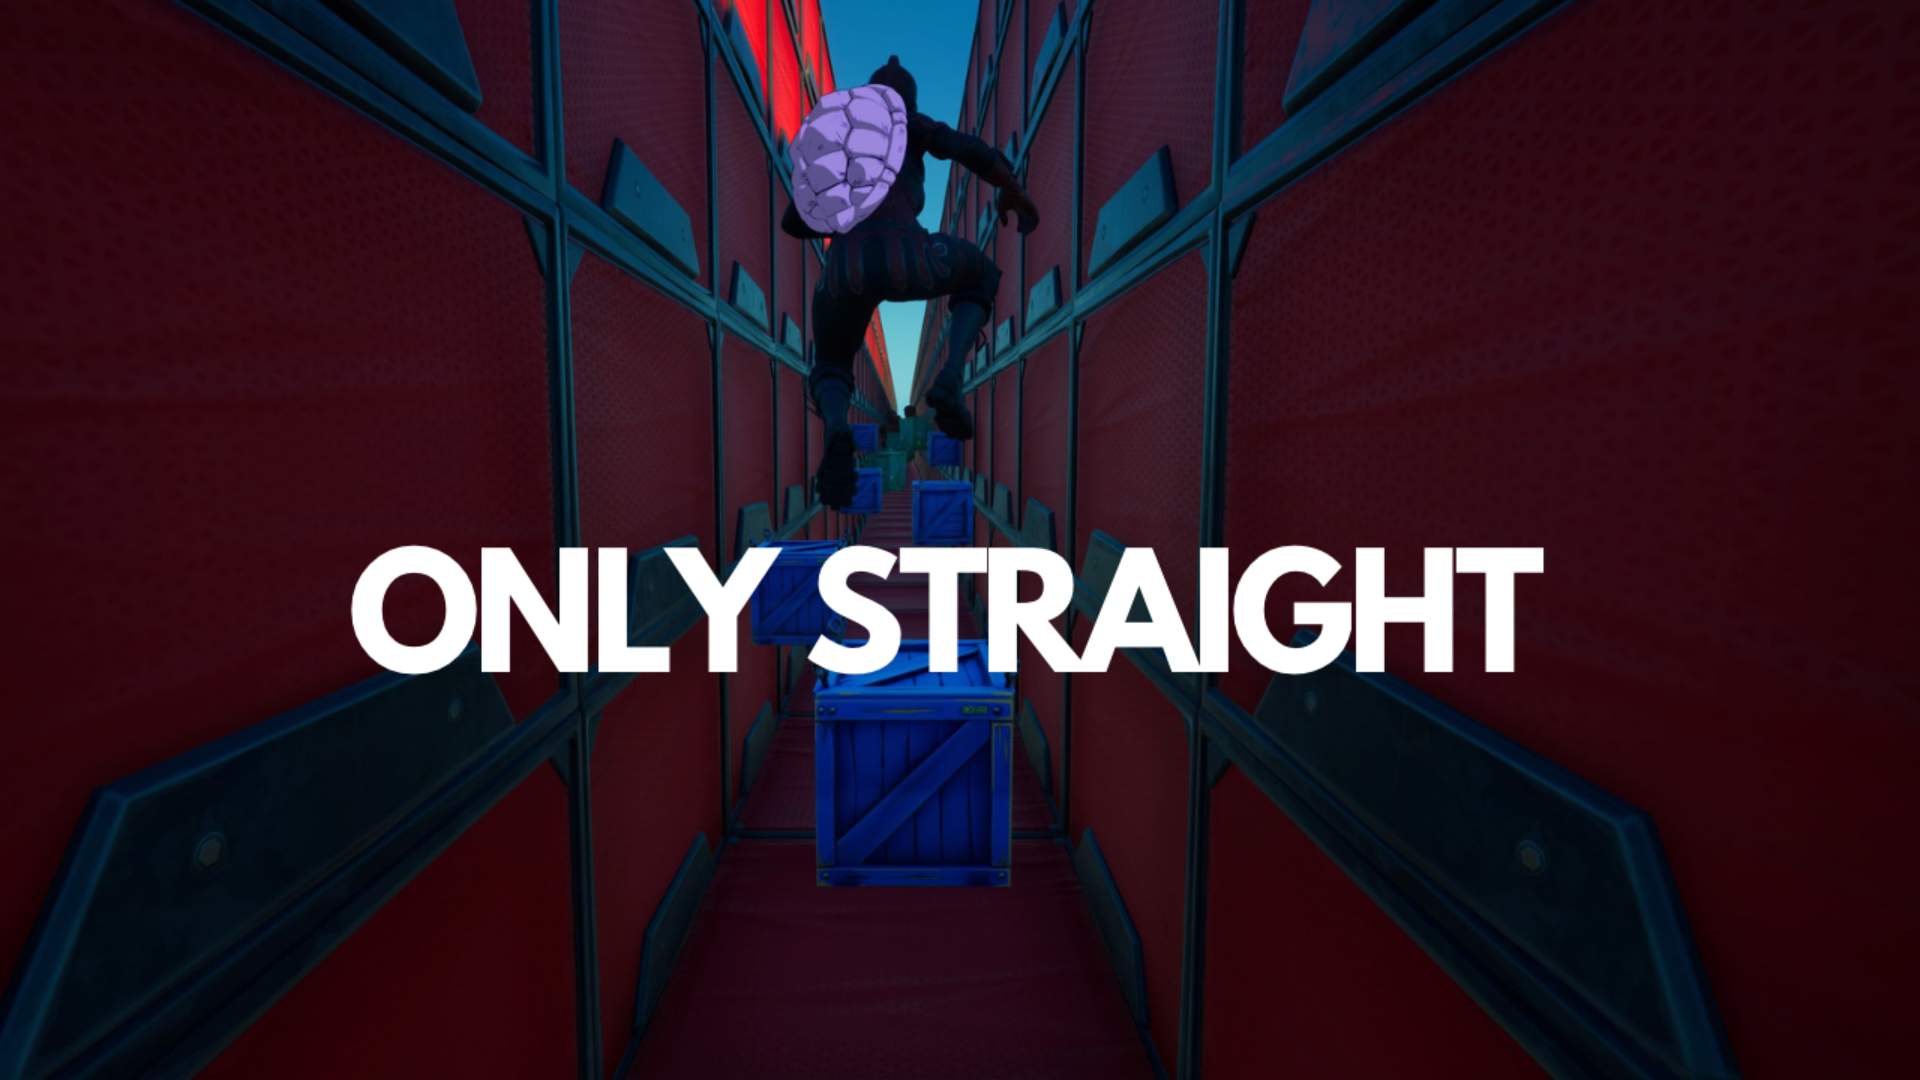 ONLY STRAIGHT